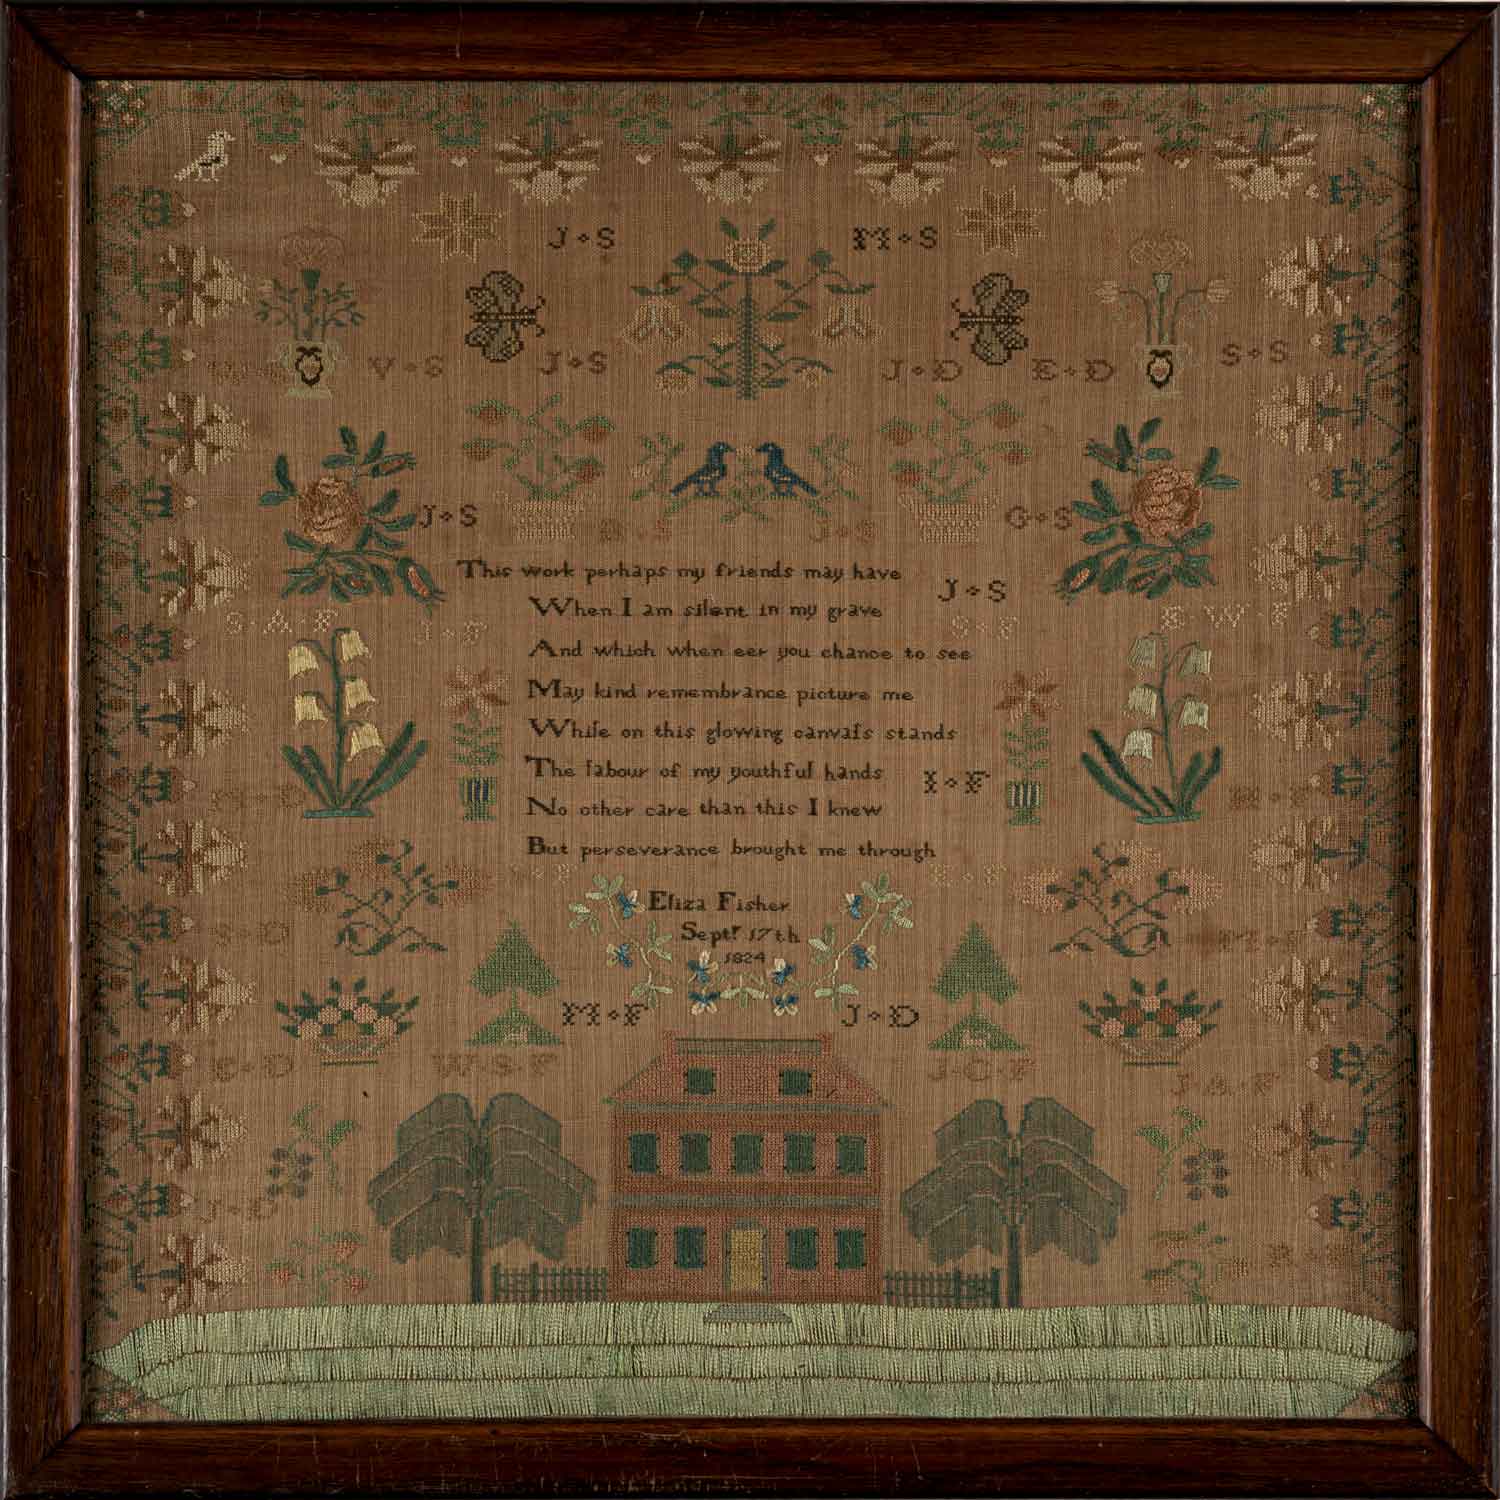 Photo of a needlework with a house and trees under stitched text that is hard to read